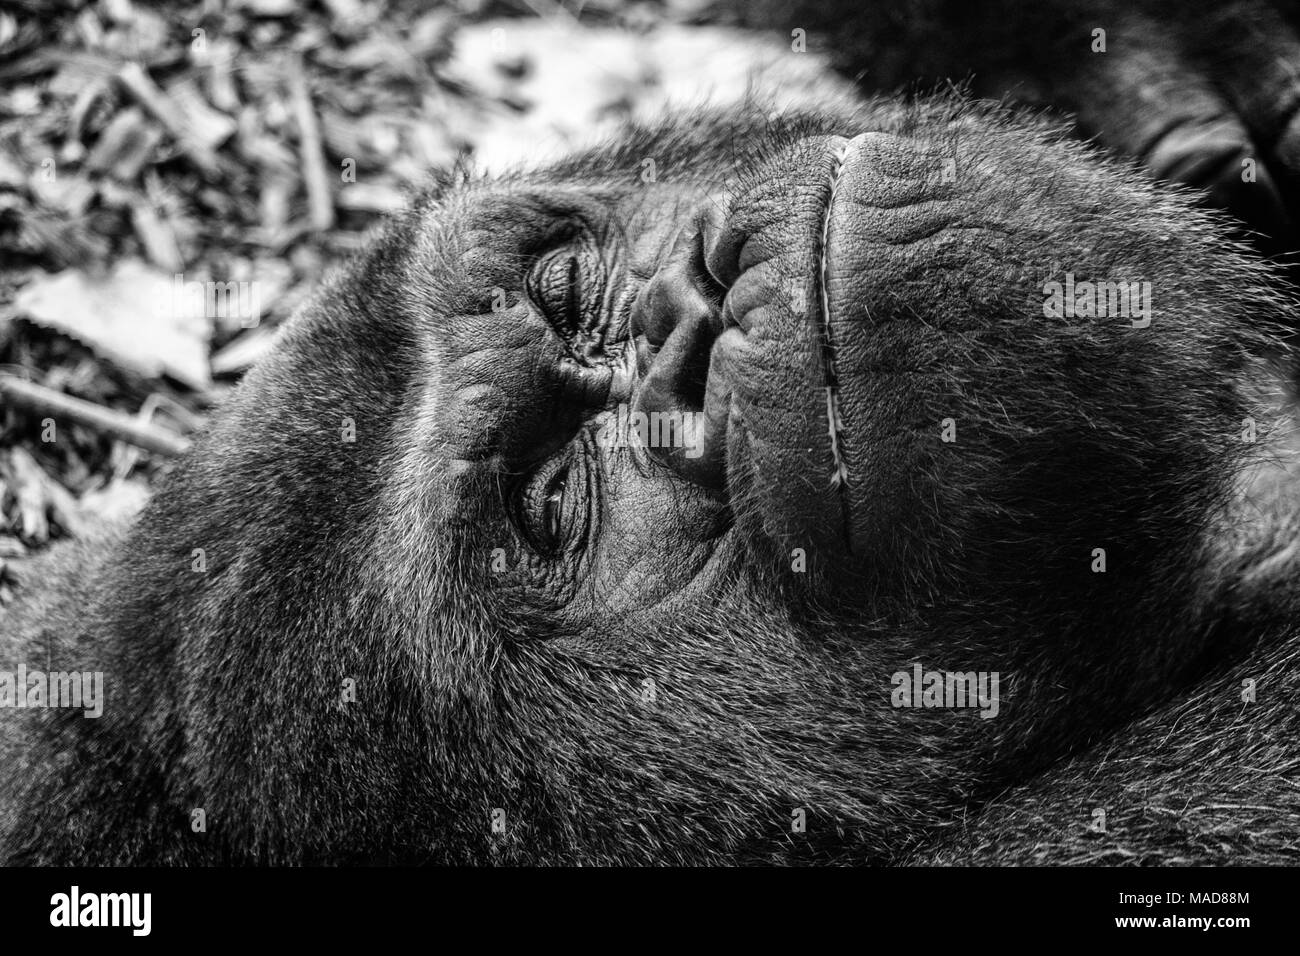 lazy gorilla relaxing contently Stock Photo